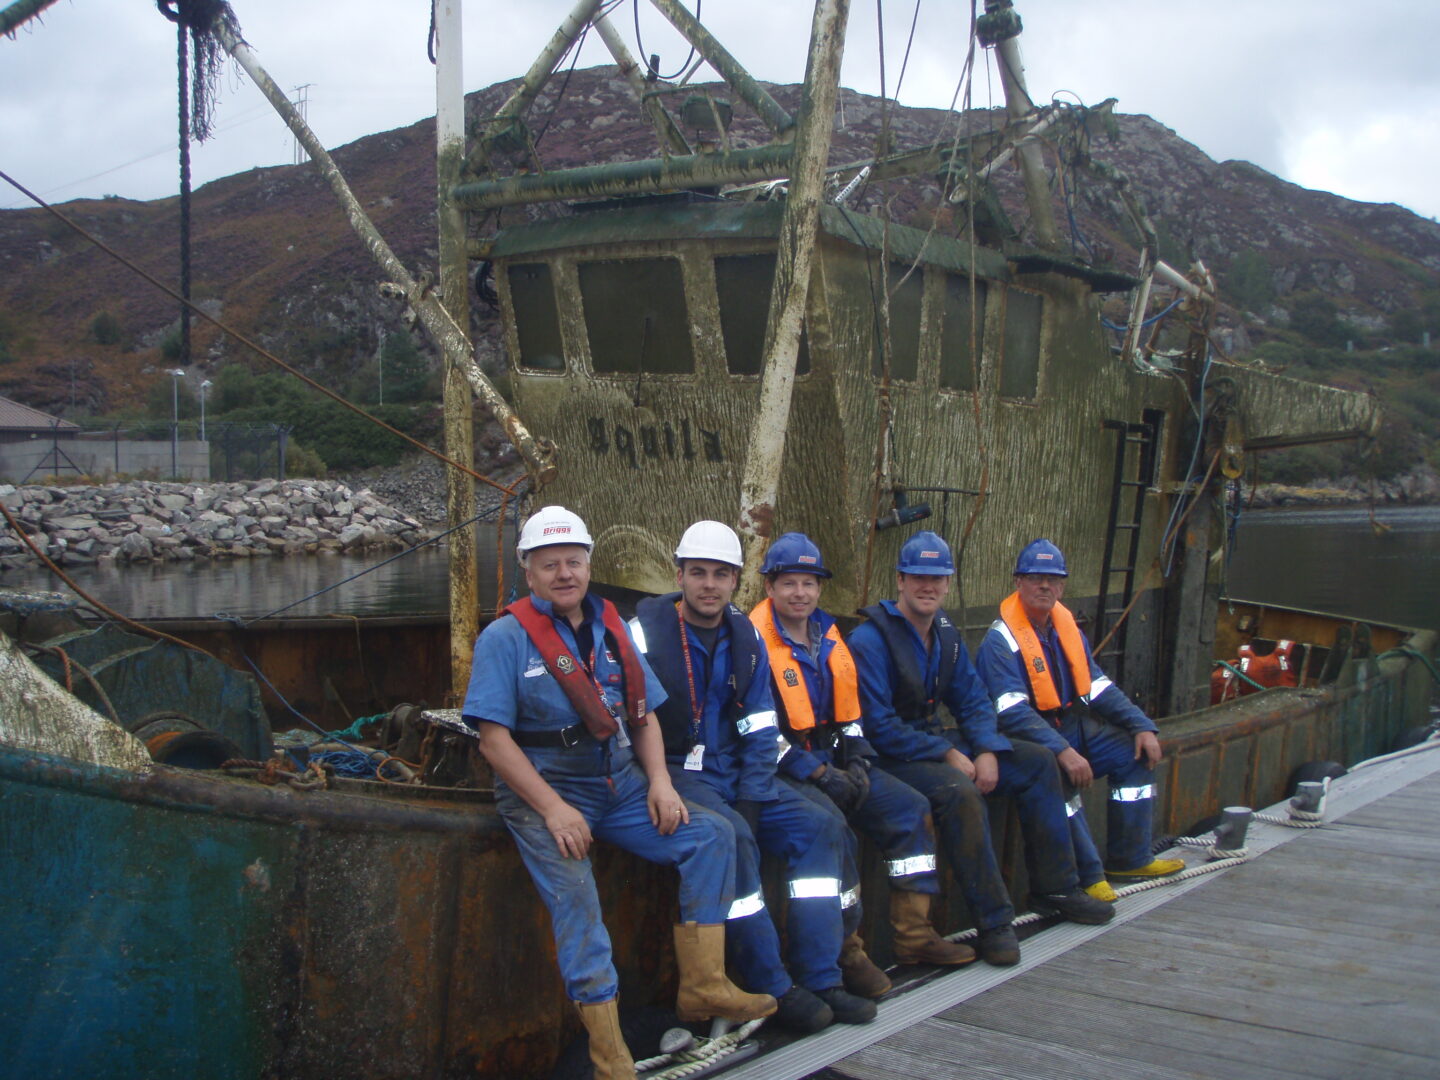 a photo of the briggs team with the aquila